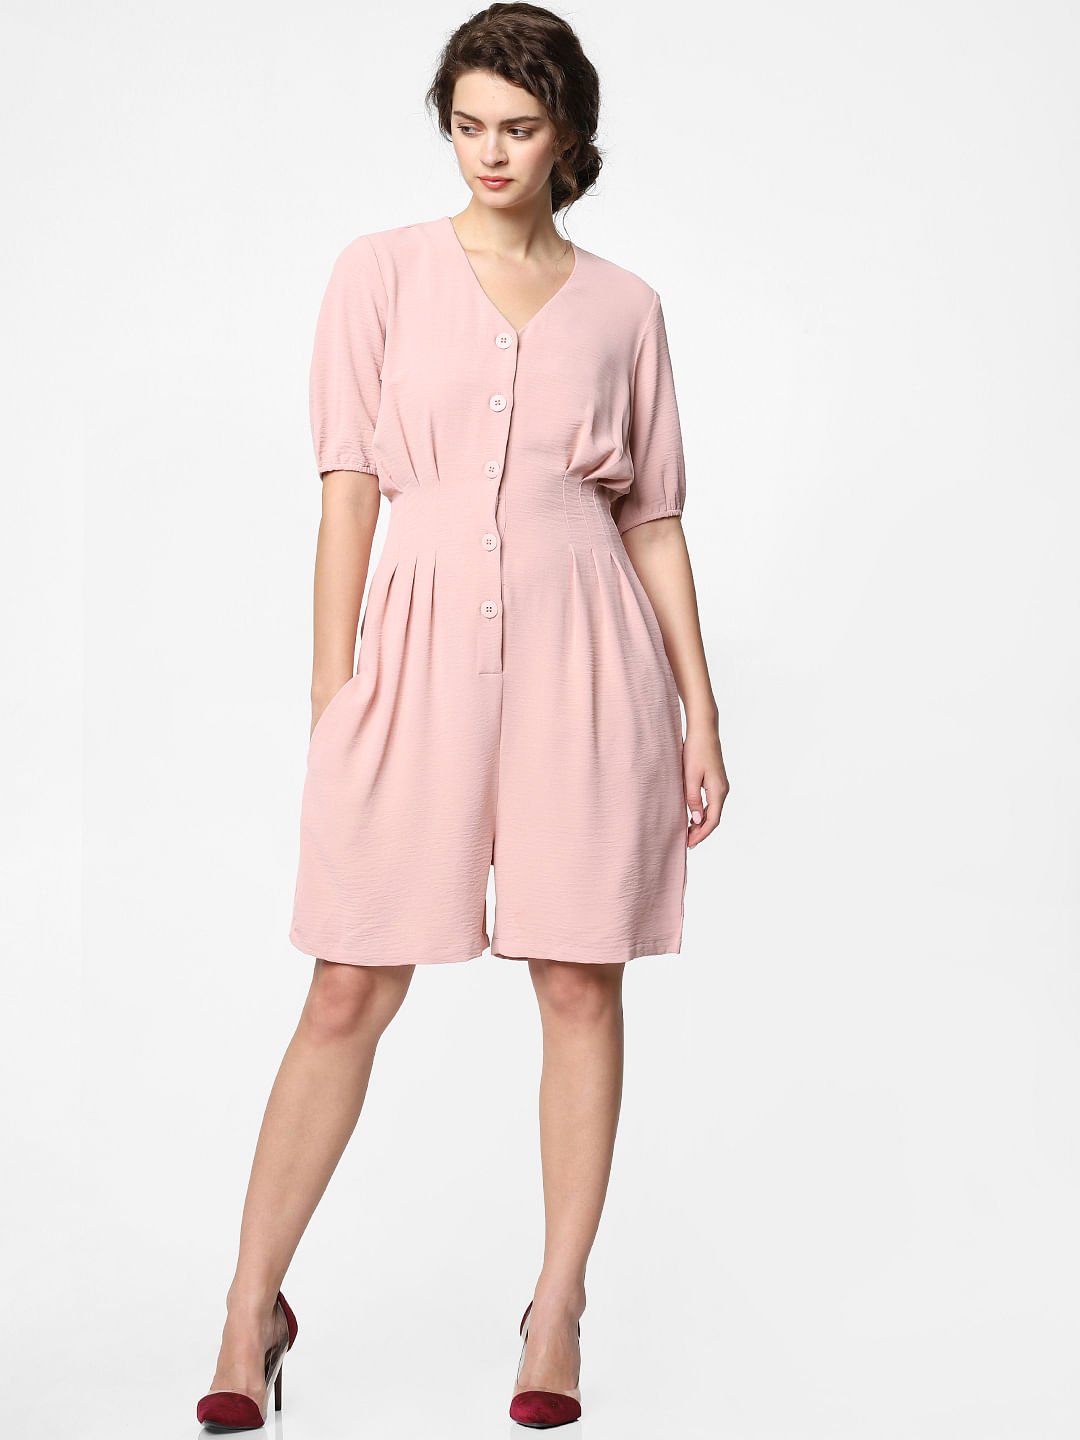 Pink Summer Playsuit for Women